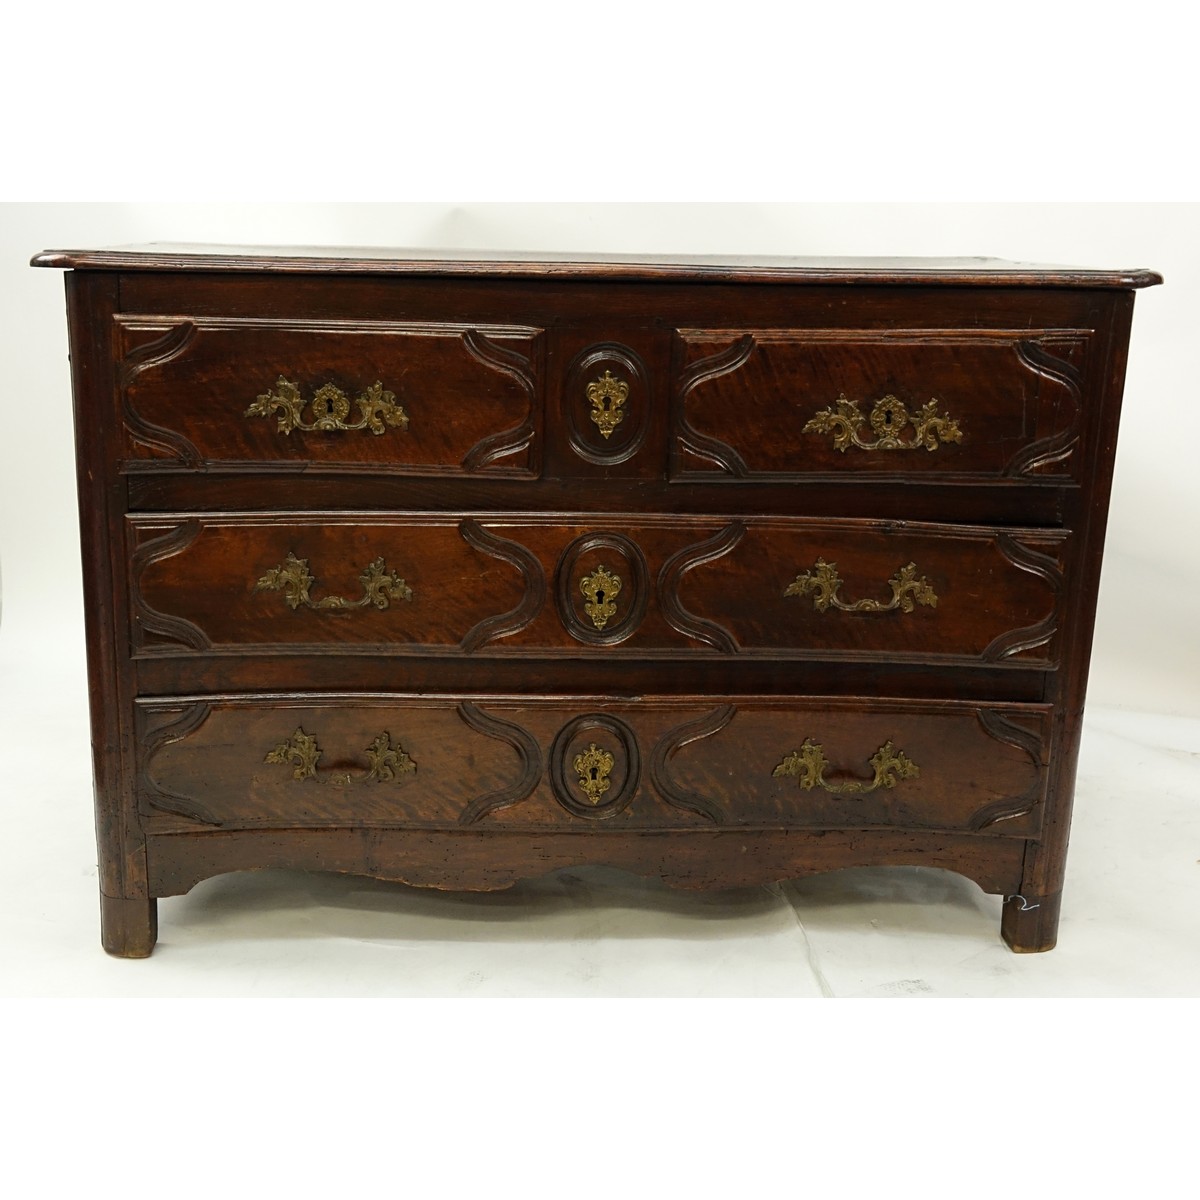 18/19th Century French Bronze Mounted, Carved Walnut Commode/Chest of Drawers. Two short sliding drawers with two large drawers, stands on bracket feet.